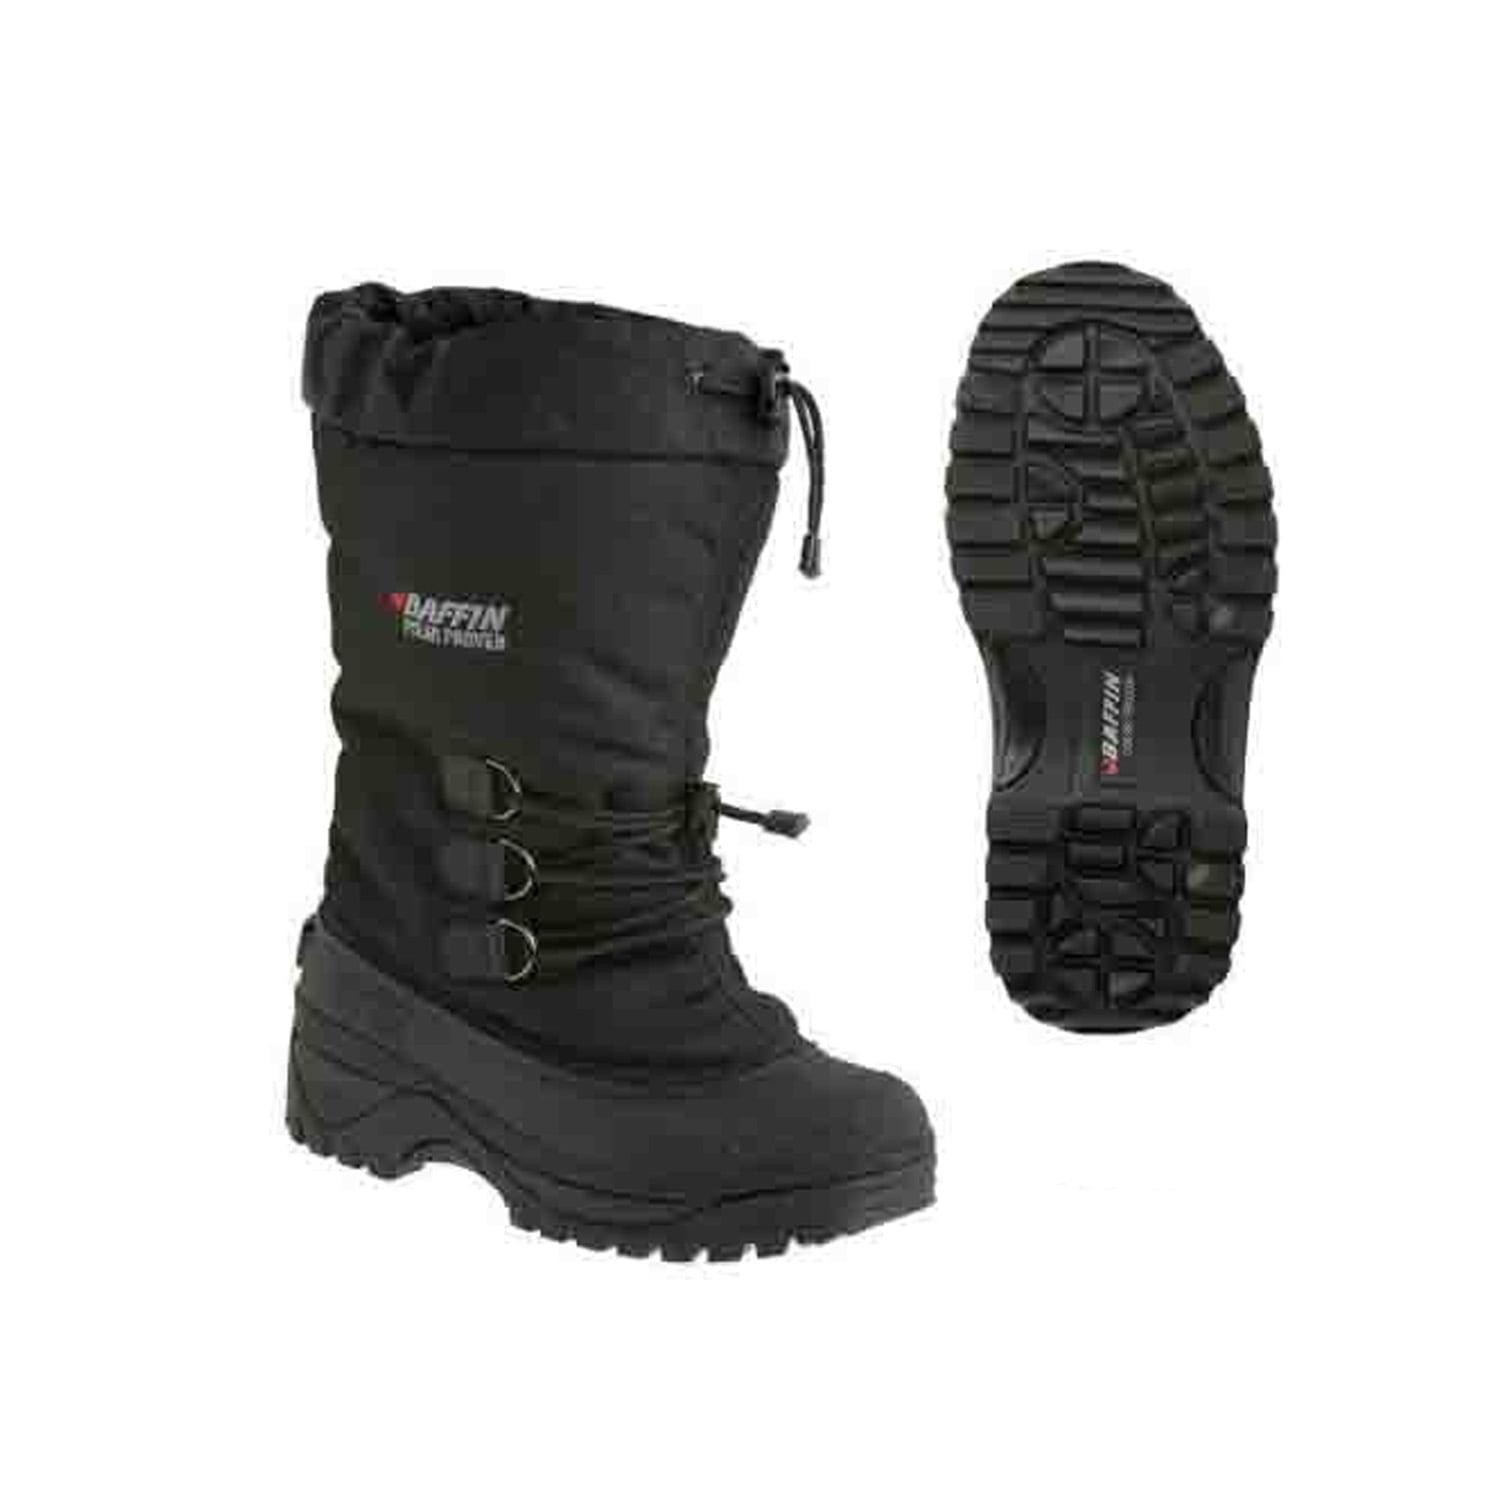 Baffin New Mens Arctic Boots, Size 7, 10-28287, 4300-0161-001 7 ...